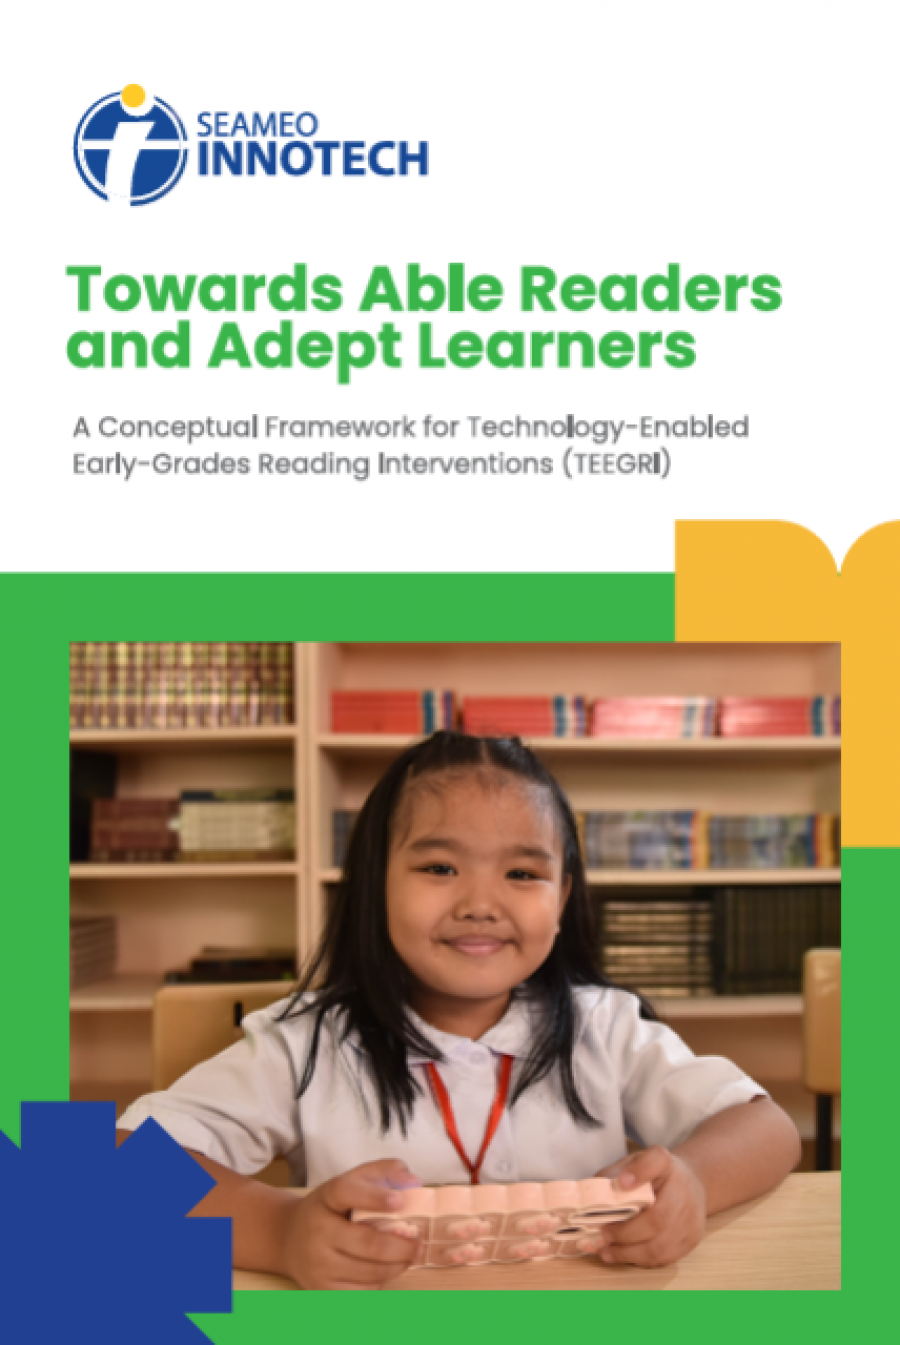 Towards Able Readers and Adept Learners:  A Conceptual Framework for Technology-Enabled  Early-Grades Reading Interventions (TEEGRI)